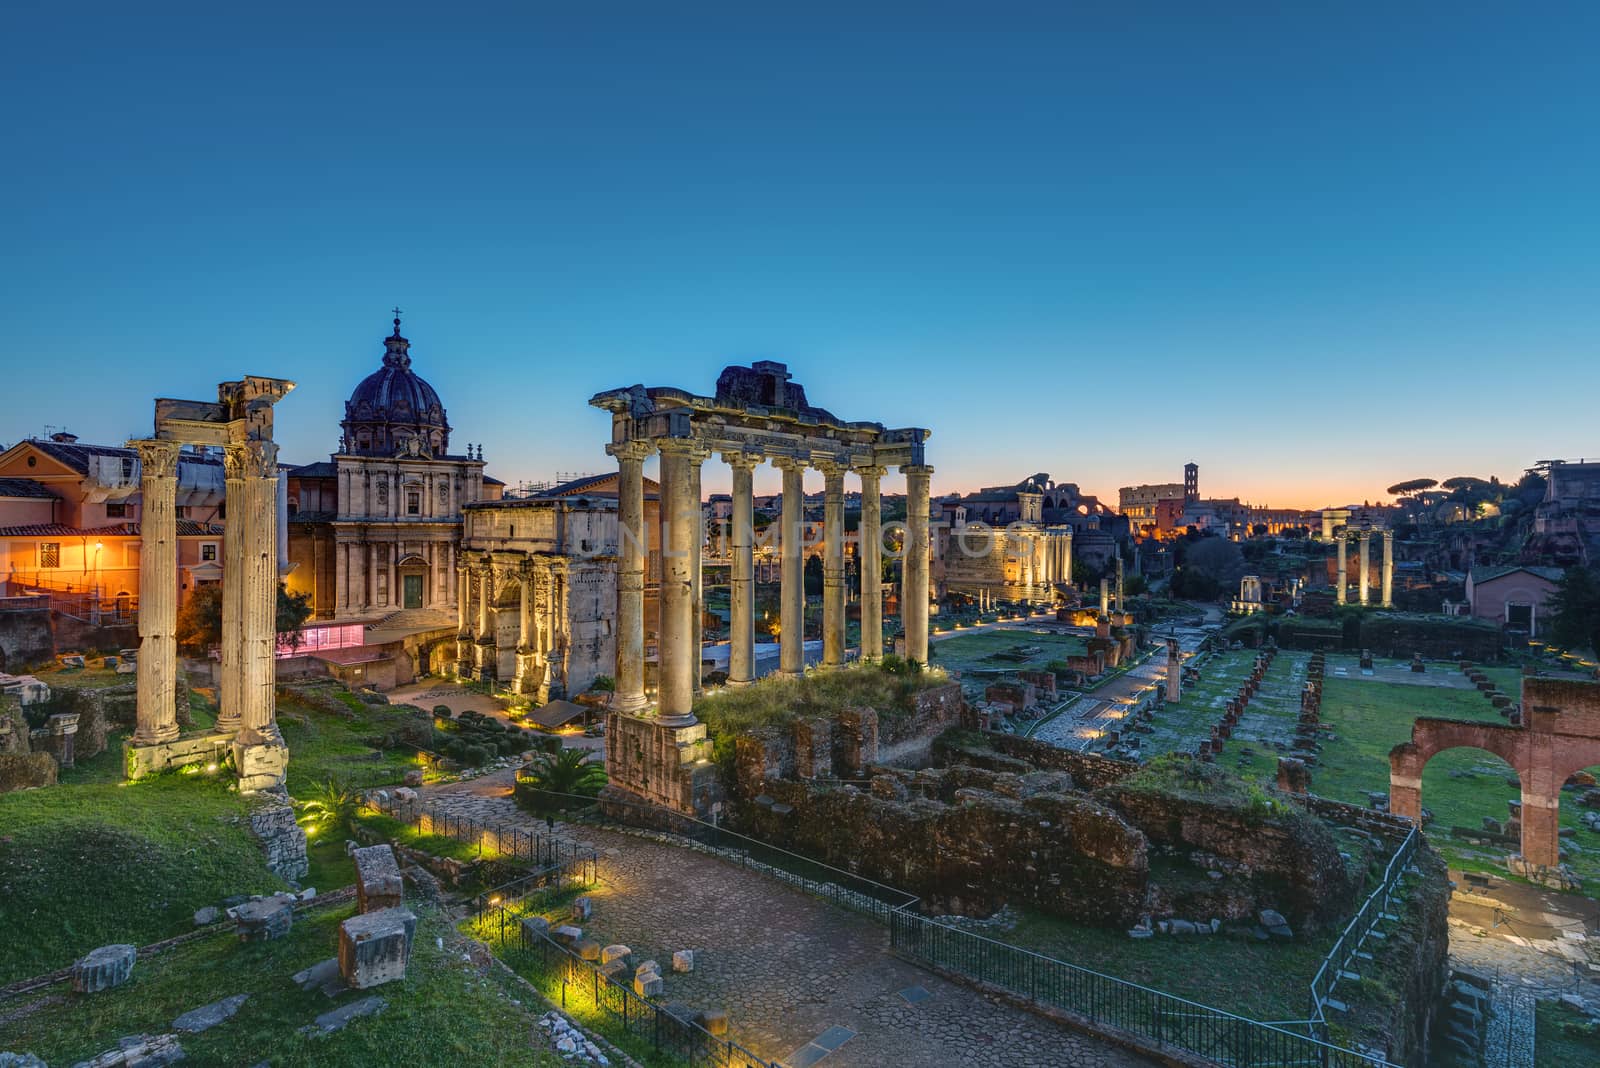 The famous ruins of the Roman Forum in Rome at dawn